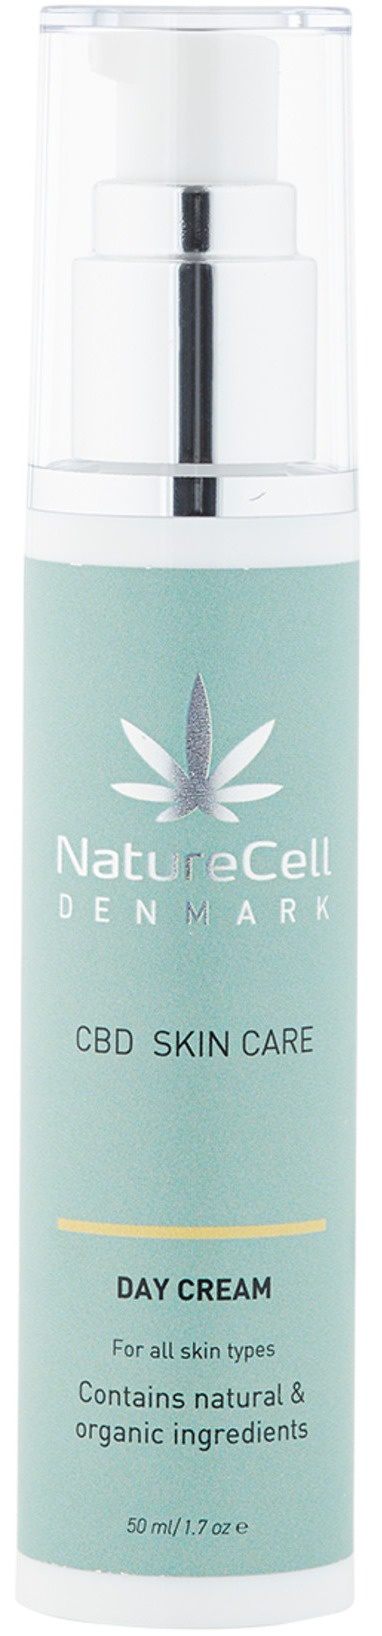 NatureCell Day Cream